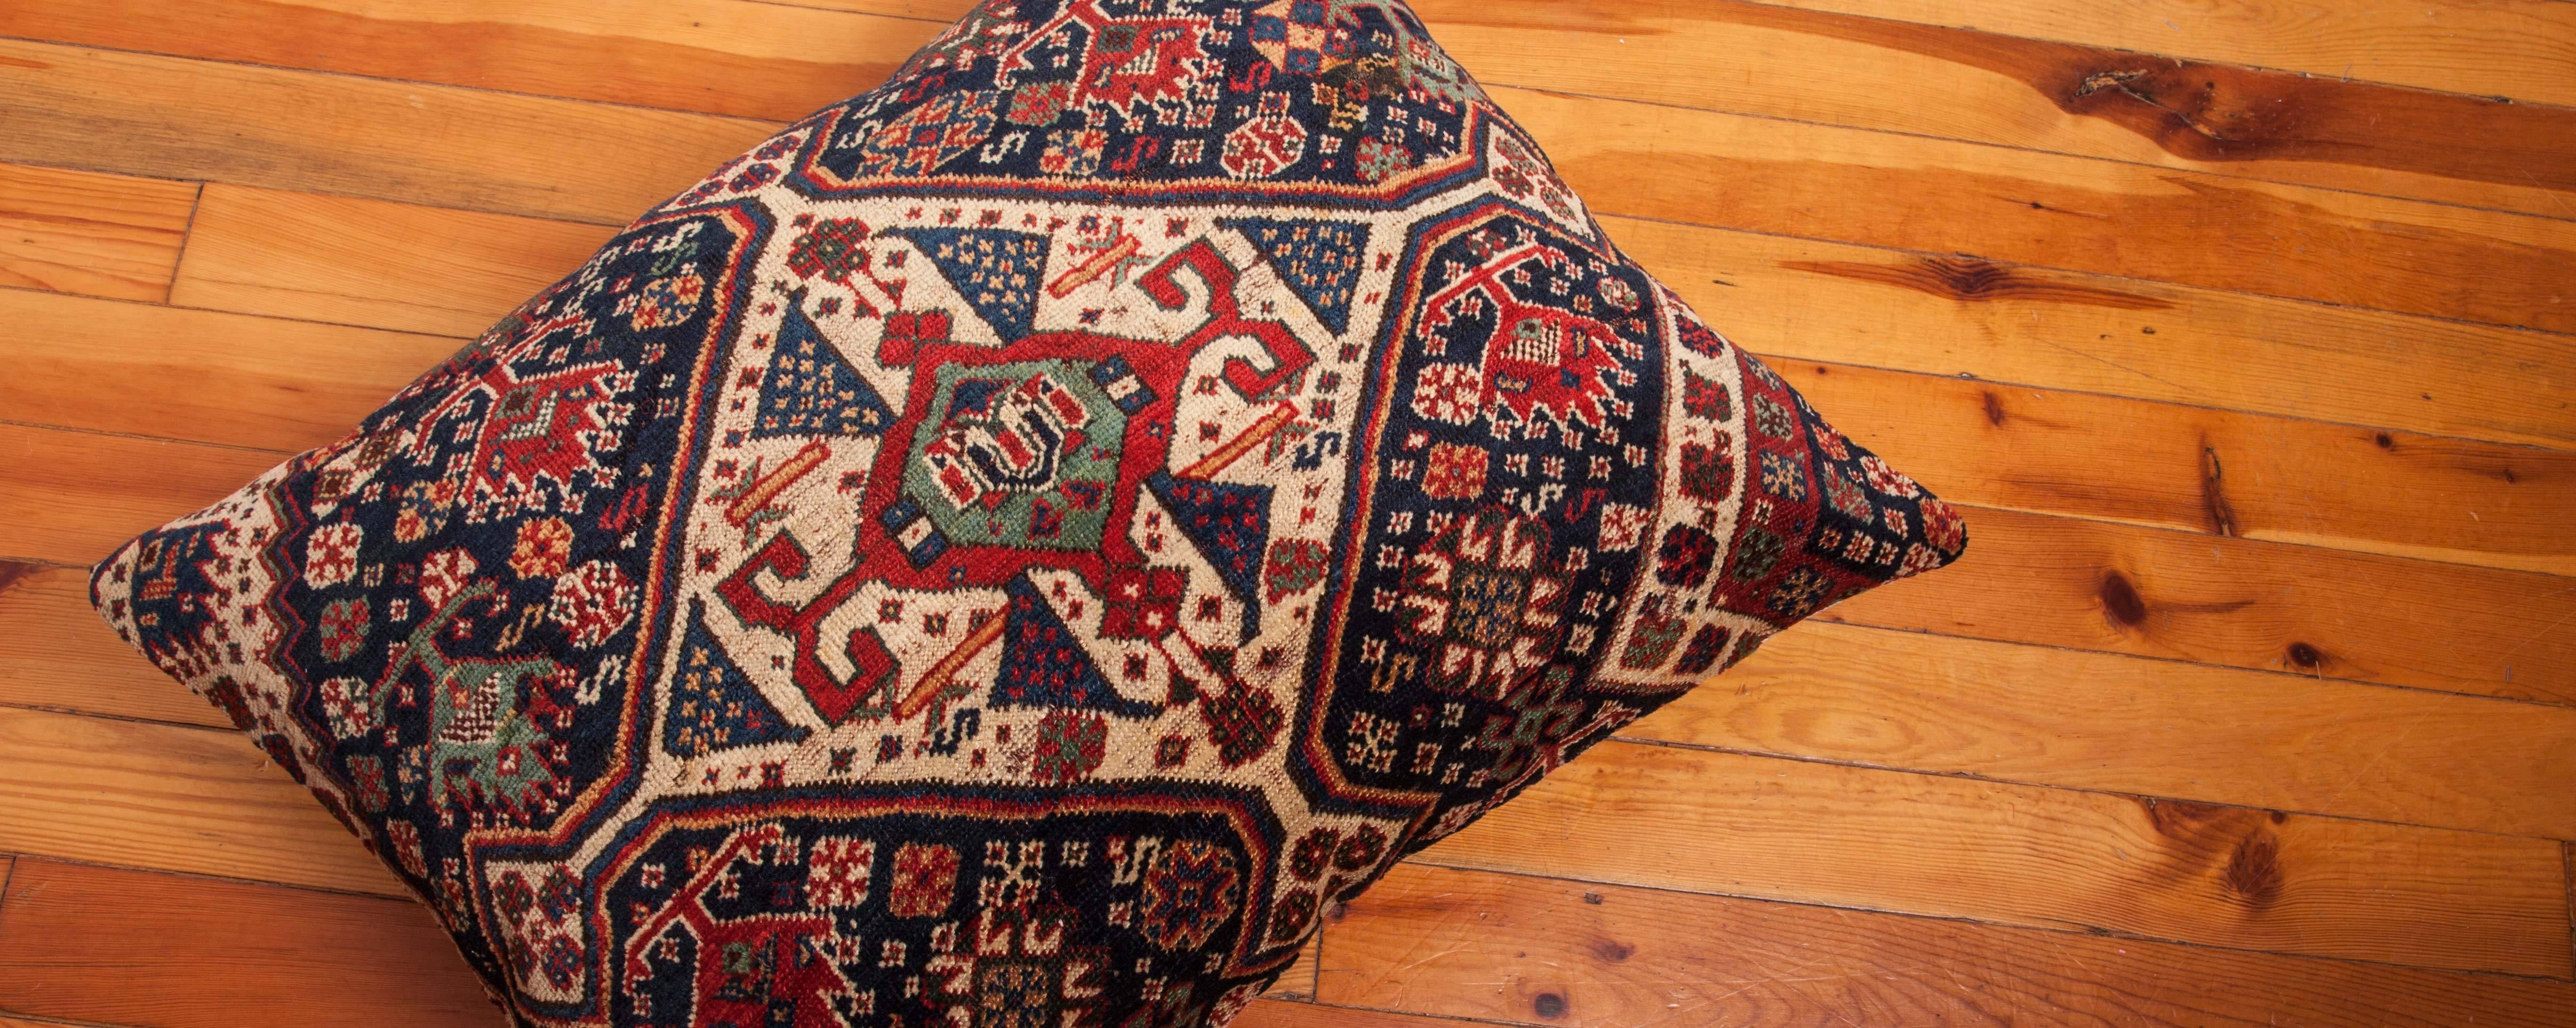 Wool Antique Pillow Case Fashioned from an 19th Century Kashgai Rug Fragment